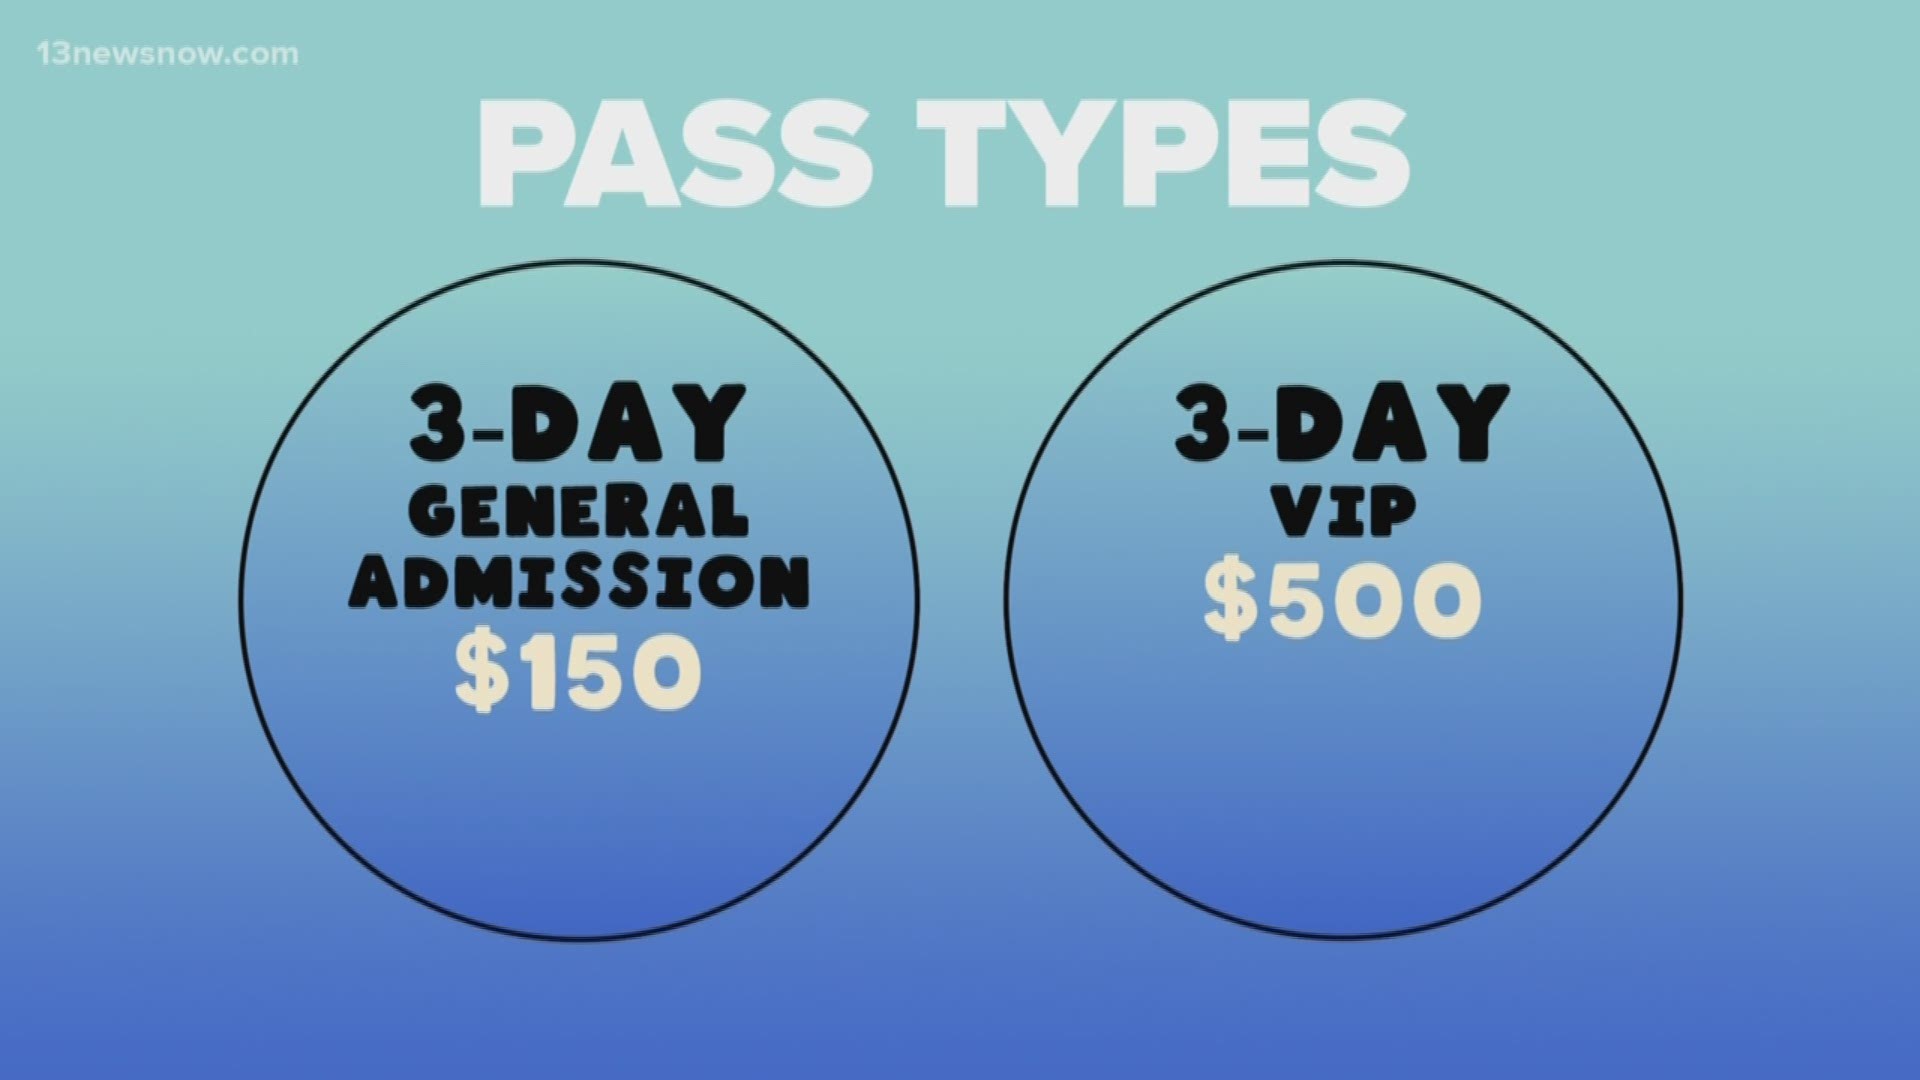 The locals-only presale offers two types of passes—3-day general admission for $150 and 3-day VIP for $500.